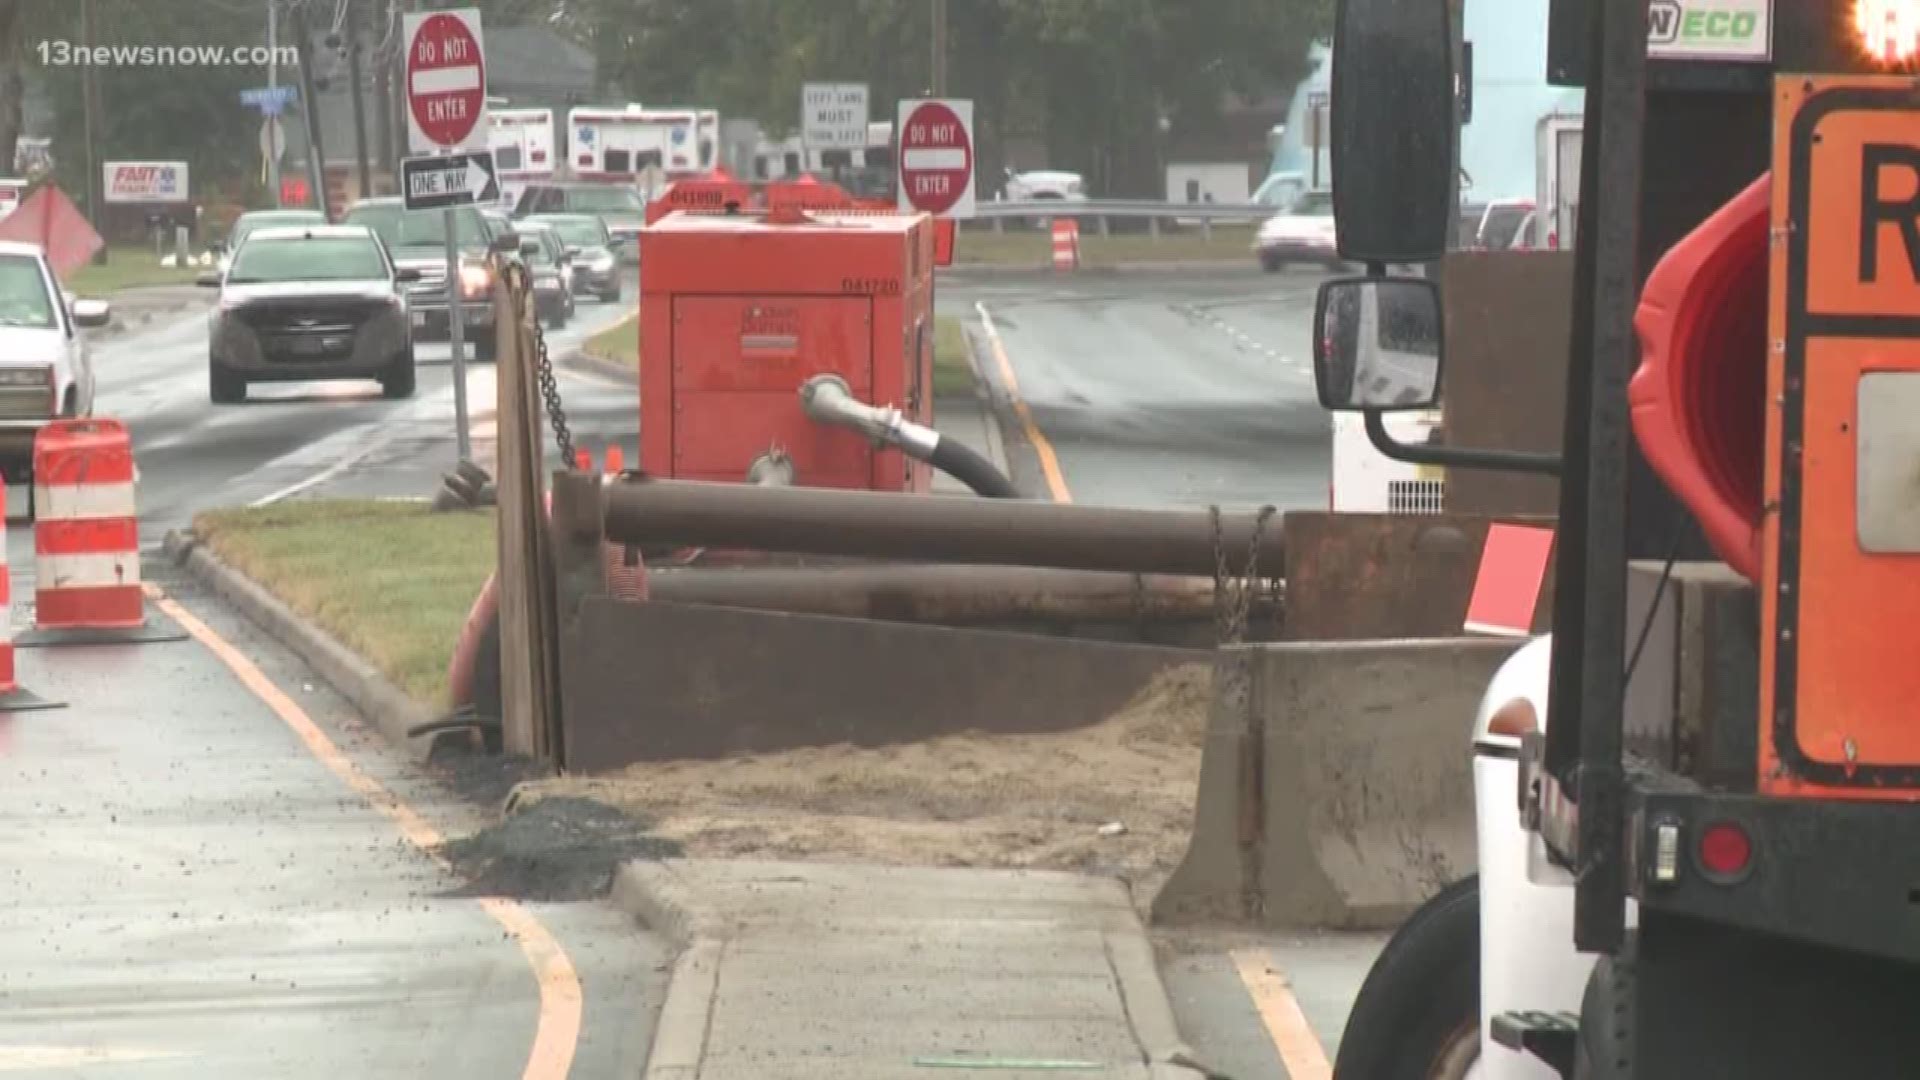 Kempsville Road is an alternate route for drivers during the Centerville Turnpike Bridge closure. A sewage spill on Kempsville Road worsened the traffic nightmare.